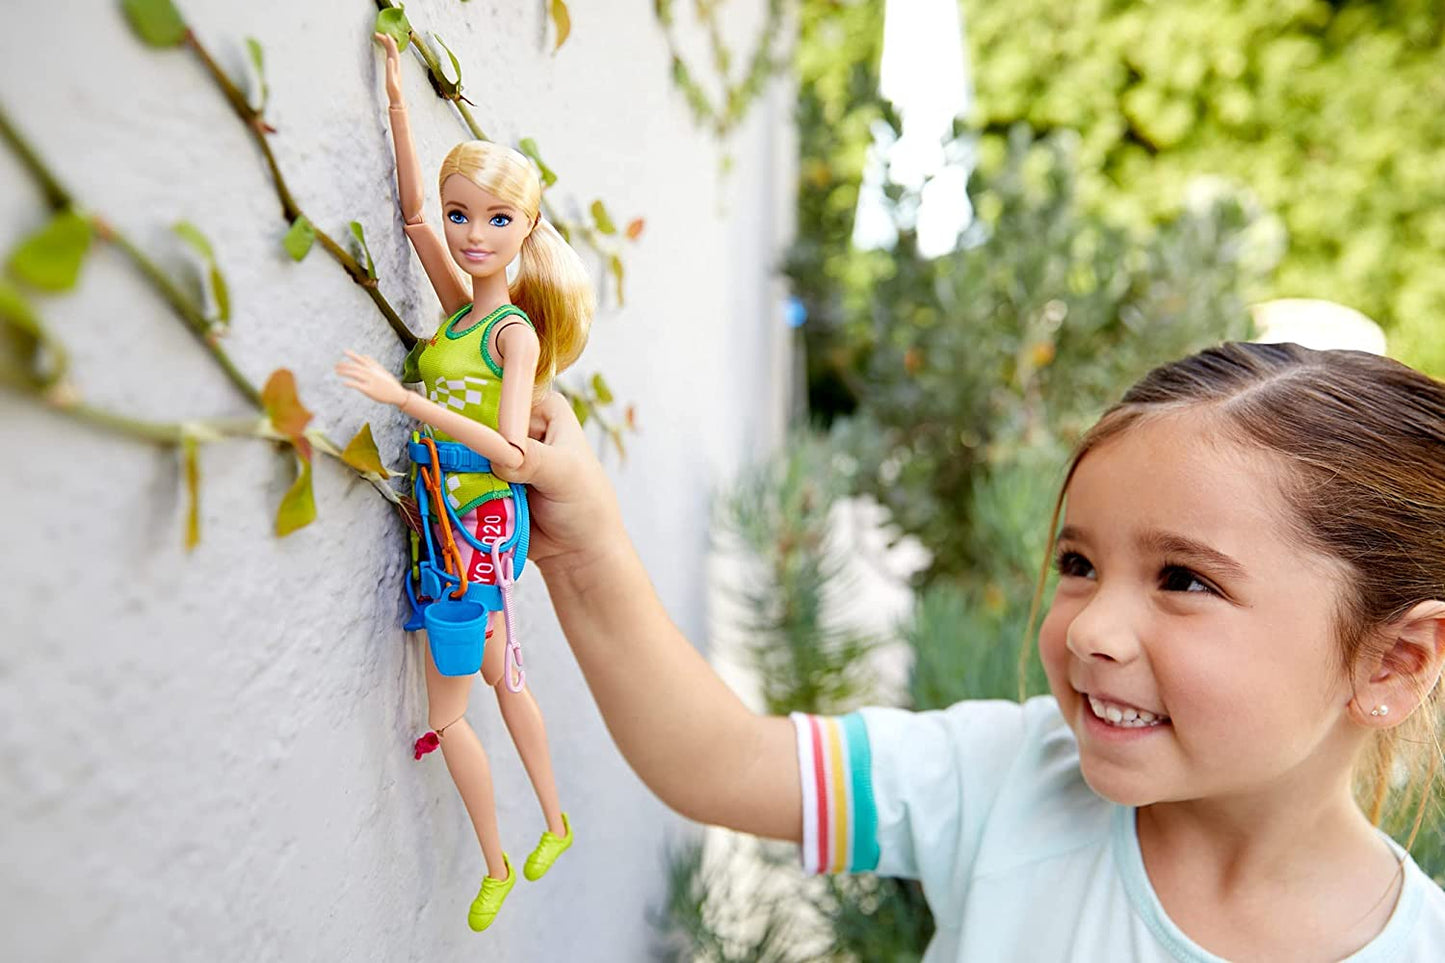 Barbie - Olympic Games Tokyo - Sport Climber Doll